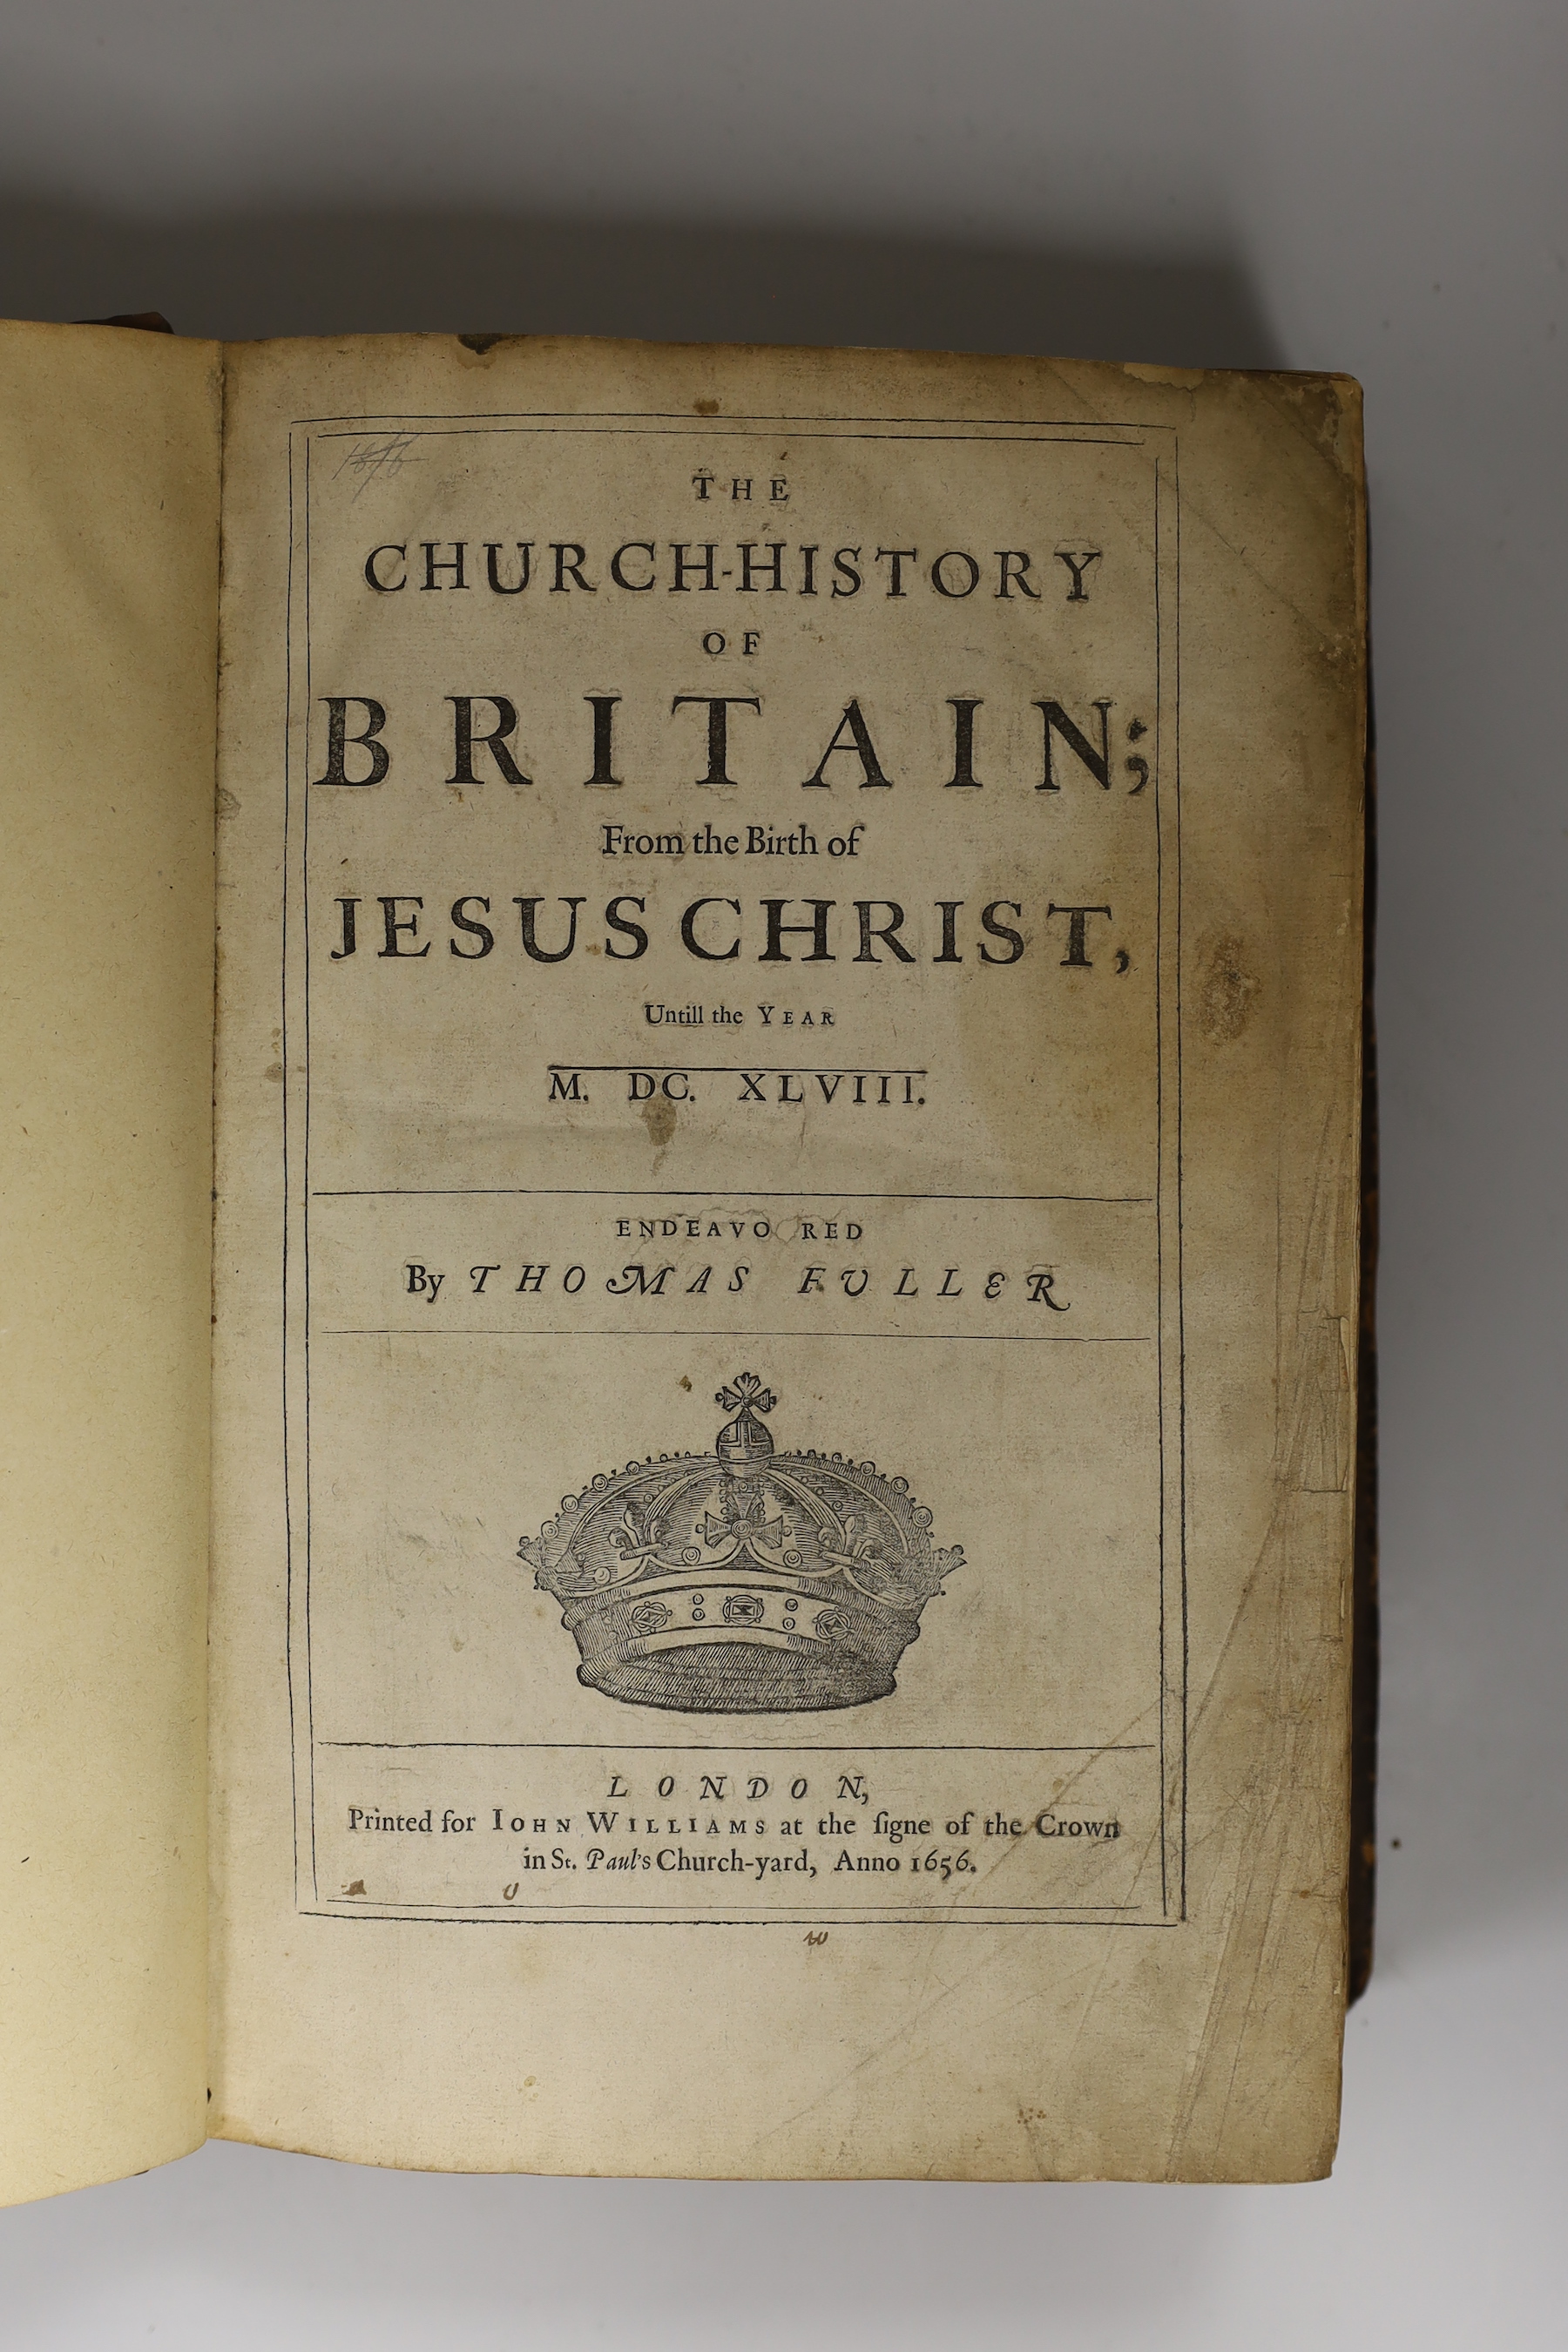 ° ° Fuller, Thomas - The Church History of Britain; From the Birth of Jesus Christ, London, 1656 - Image 2 of 3